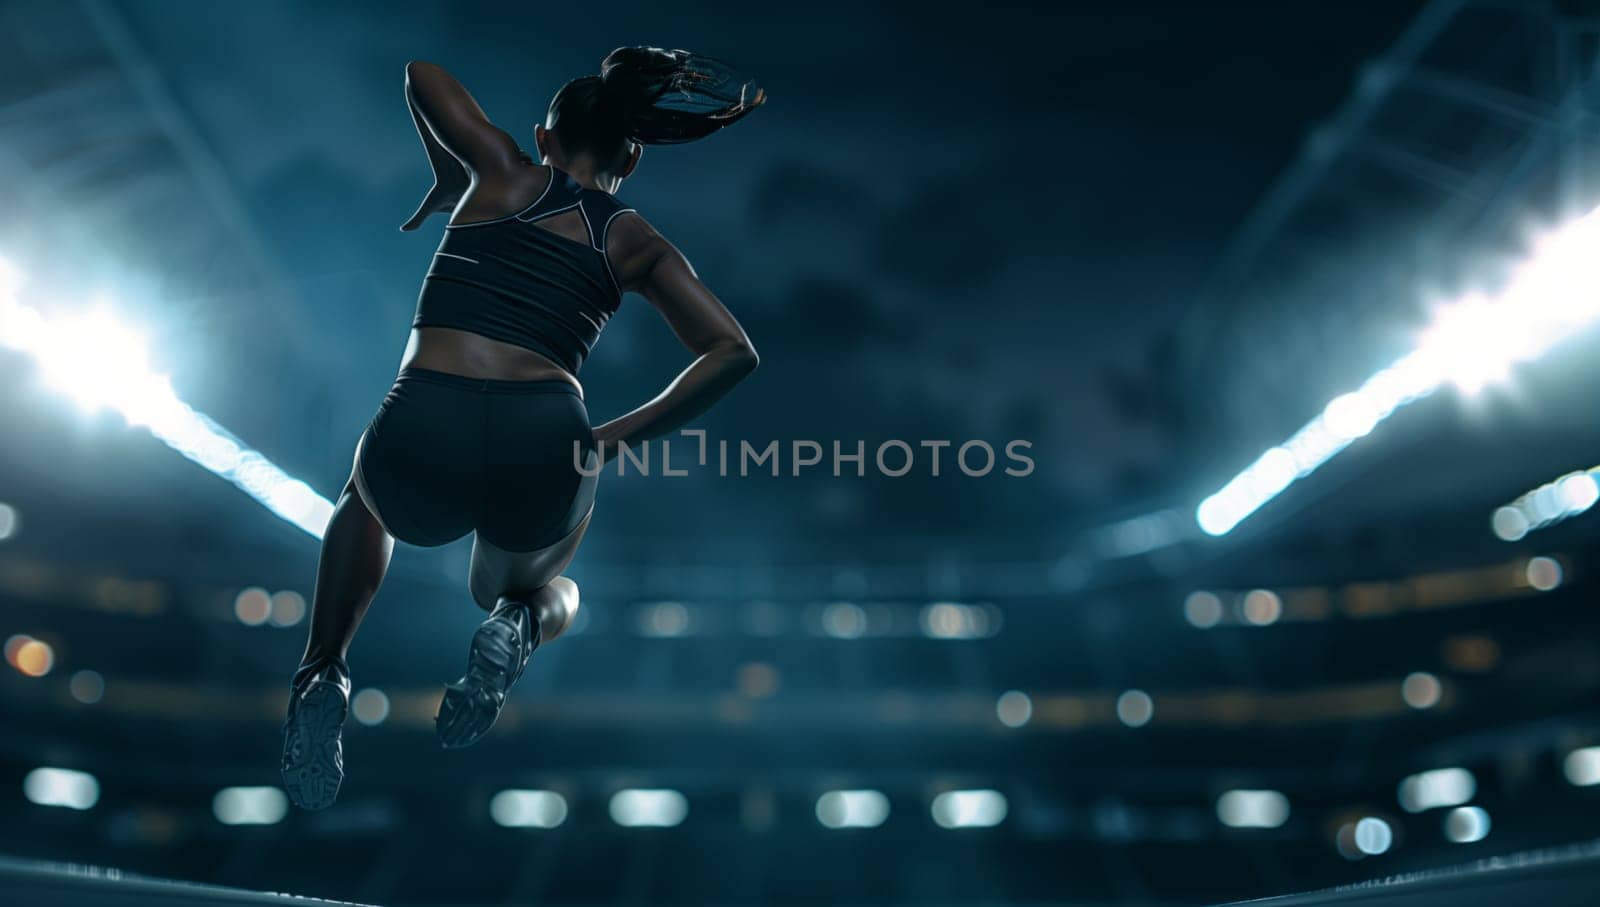 A woman in shorts is dancing in the sky at a competition event in the stadium. Her thighs are high in the air like clouds against the darkness